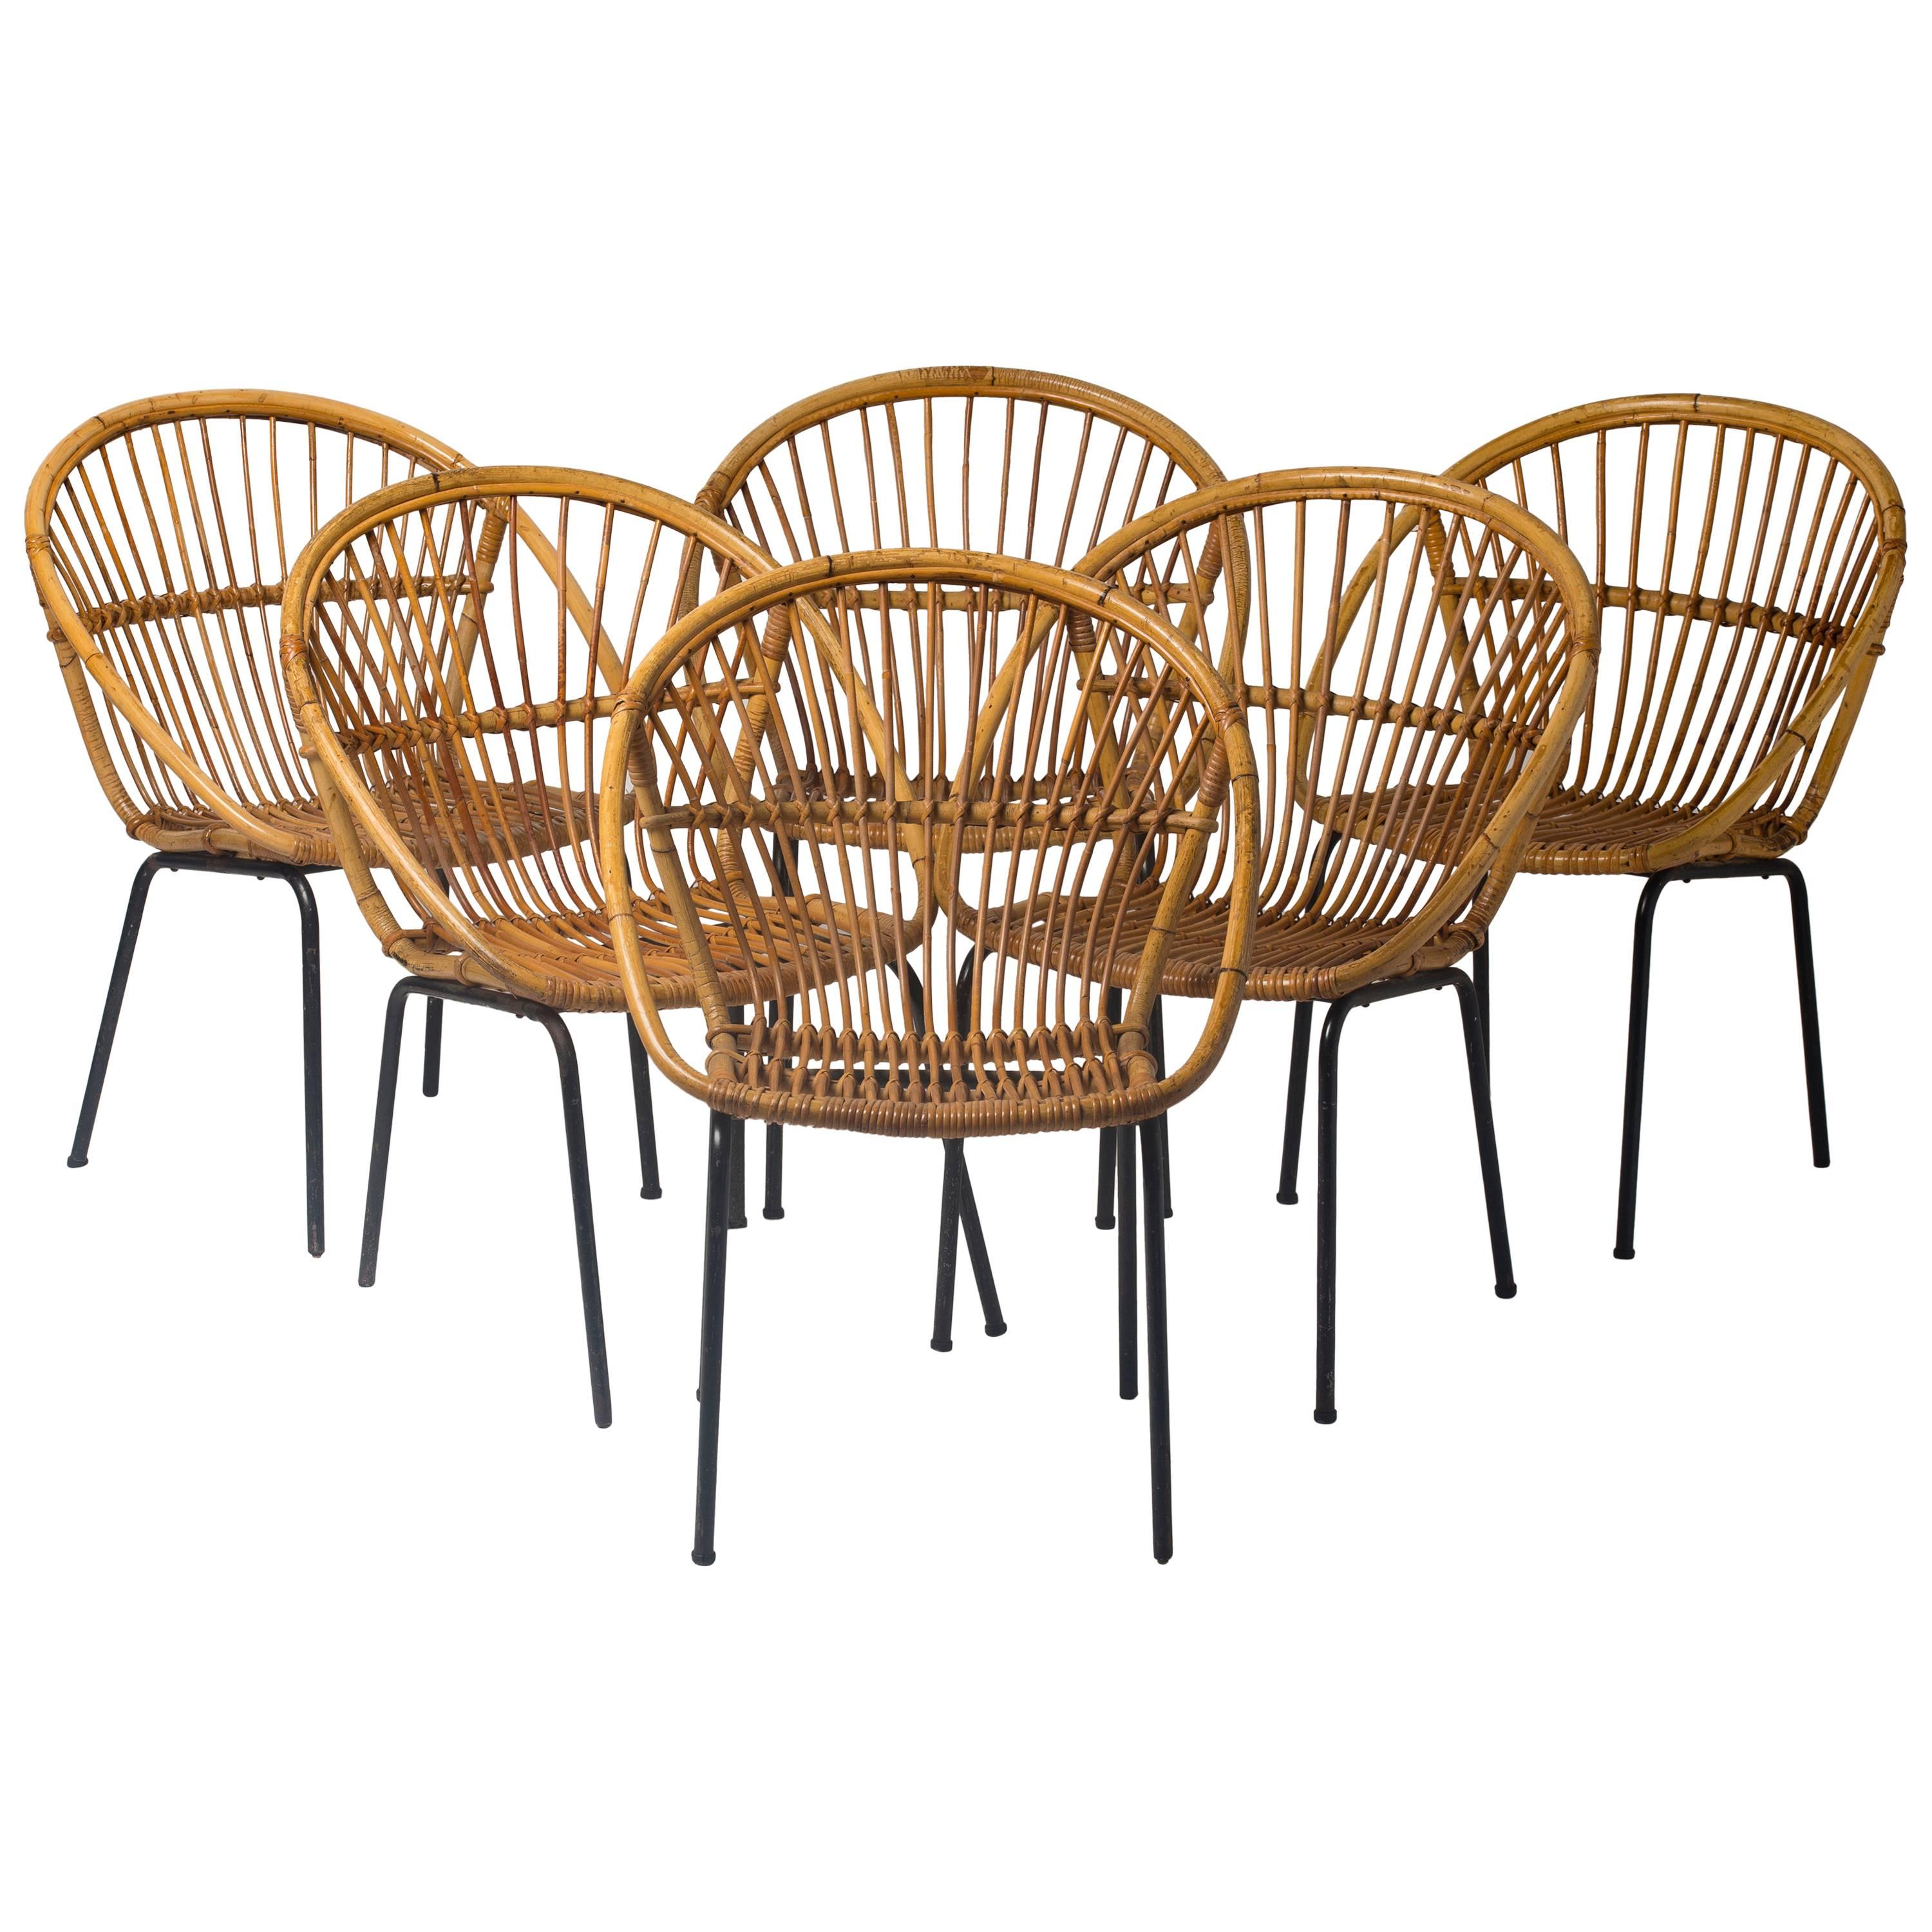 Set of Six Rattan Chairs on Black Lacquered Iron Bases, Netherlands, 1950 Period